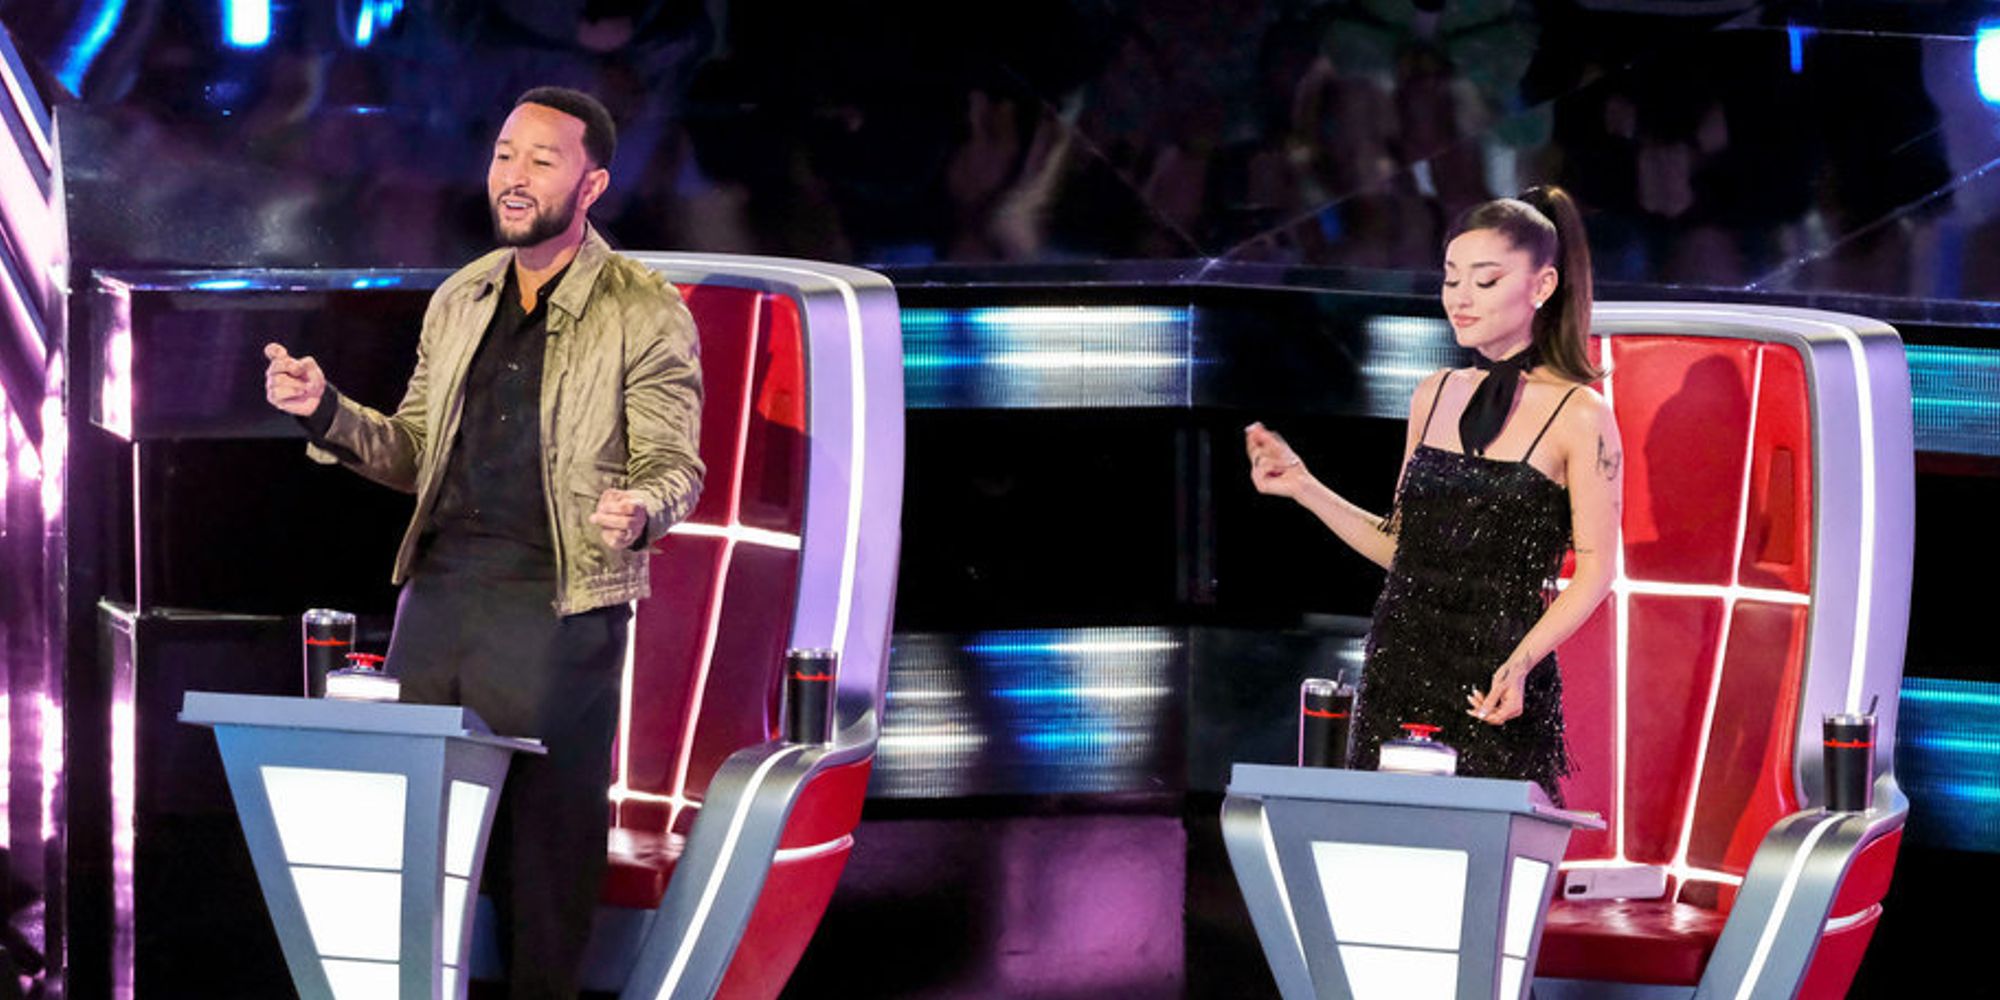 John Legend and Ariana Grande on The Voice season 21 after turning their chairs for a contestant